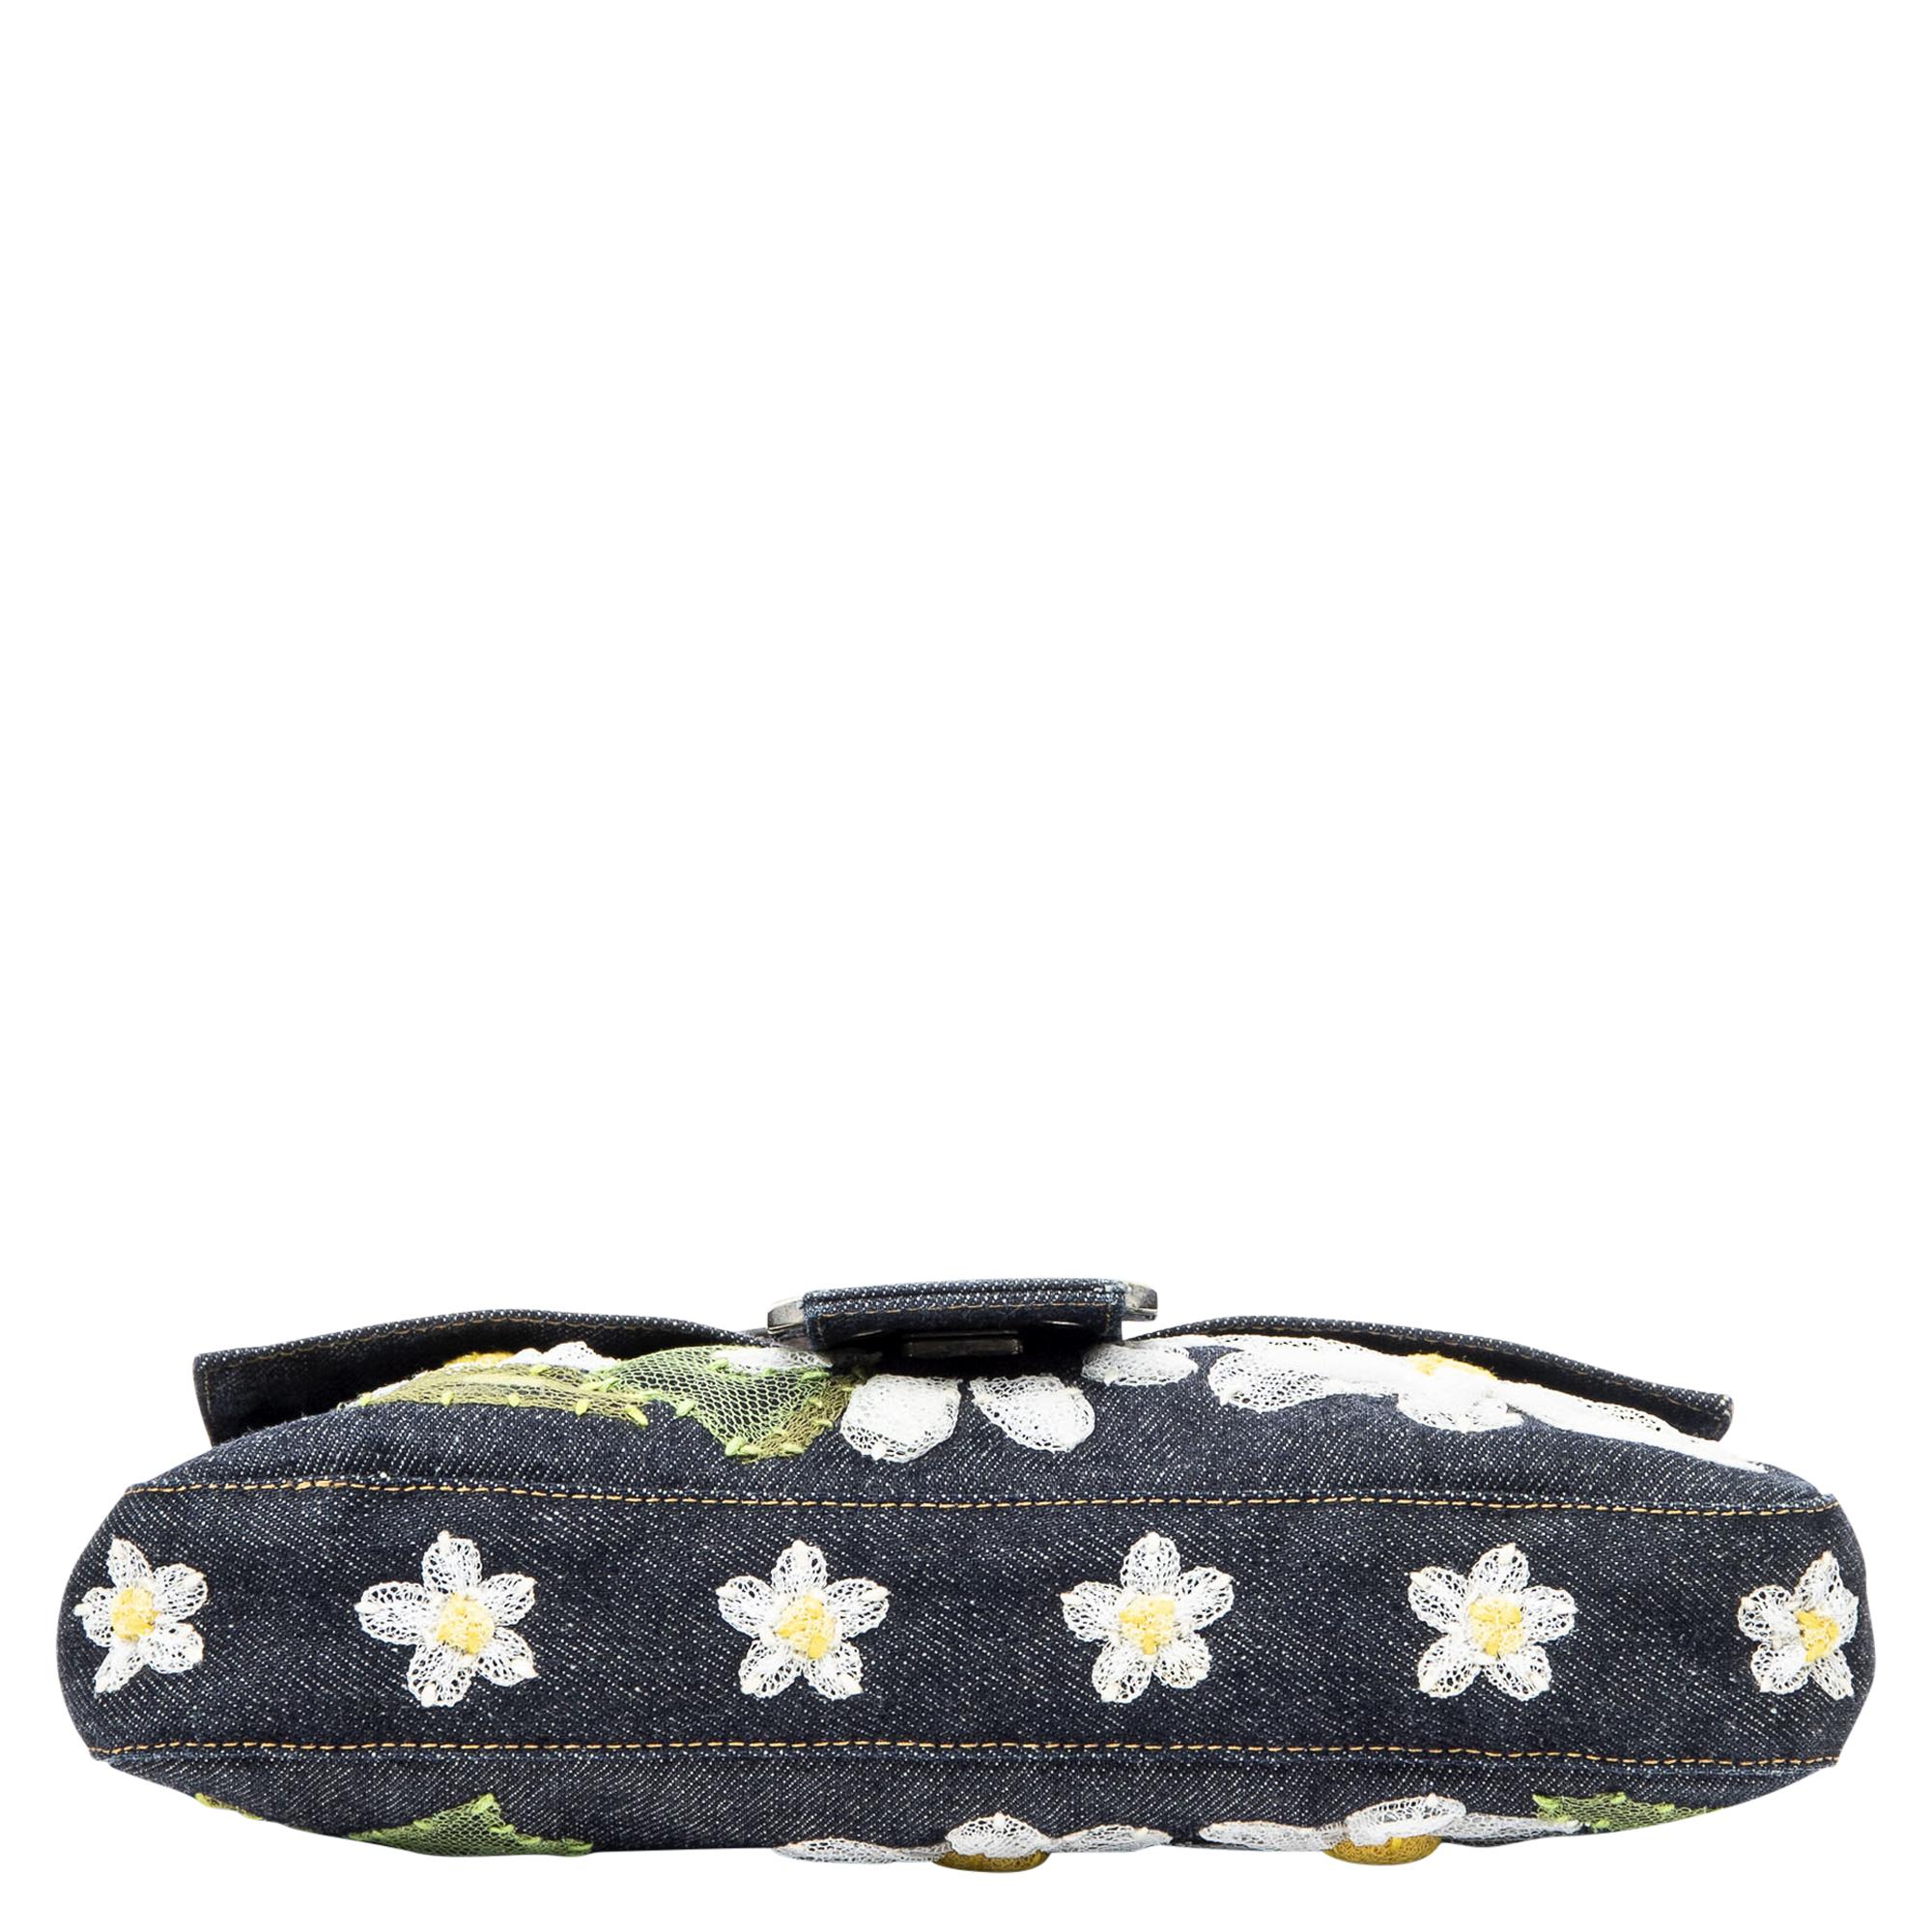 Women's or Men's Fendi Limited Edition Floral Embroidered Baguette For Sale